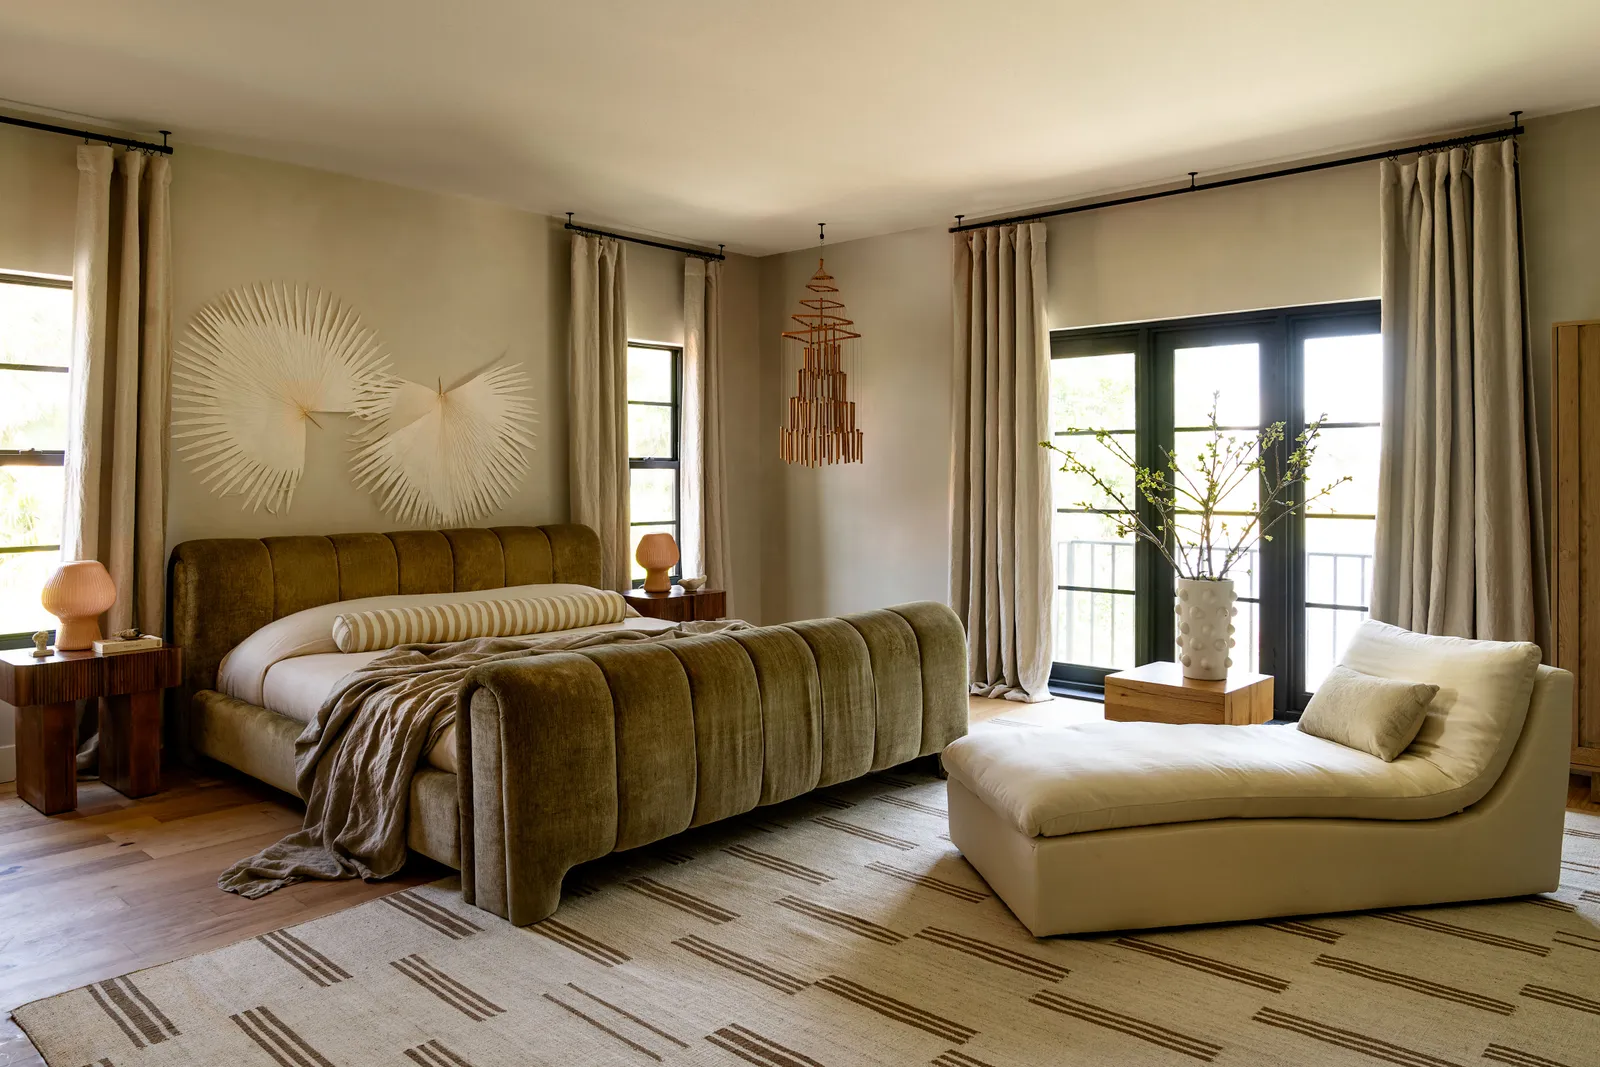 Main bedroom featuring a modern dark green bed and a beige daybed